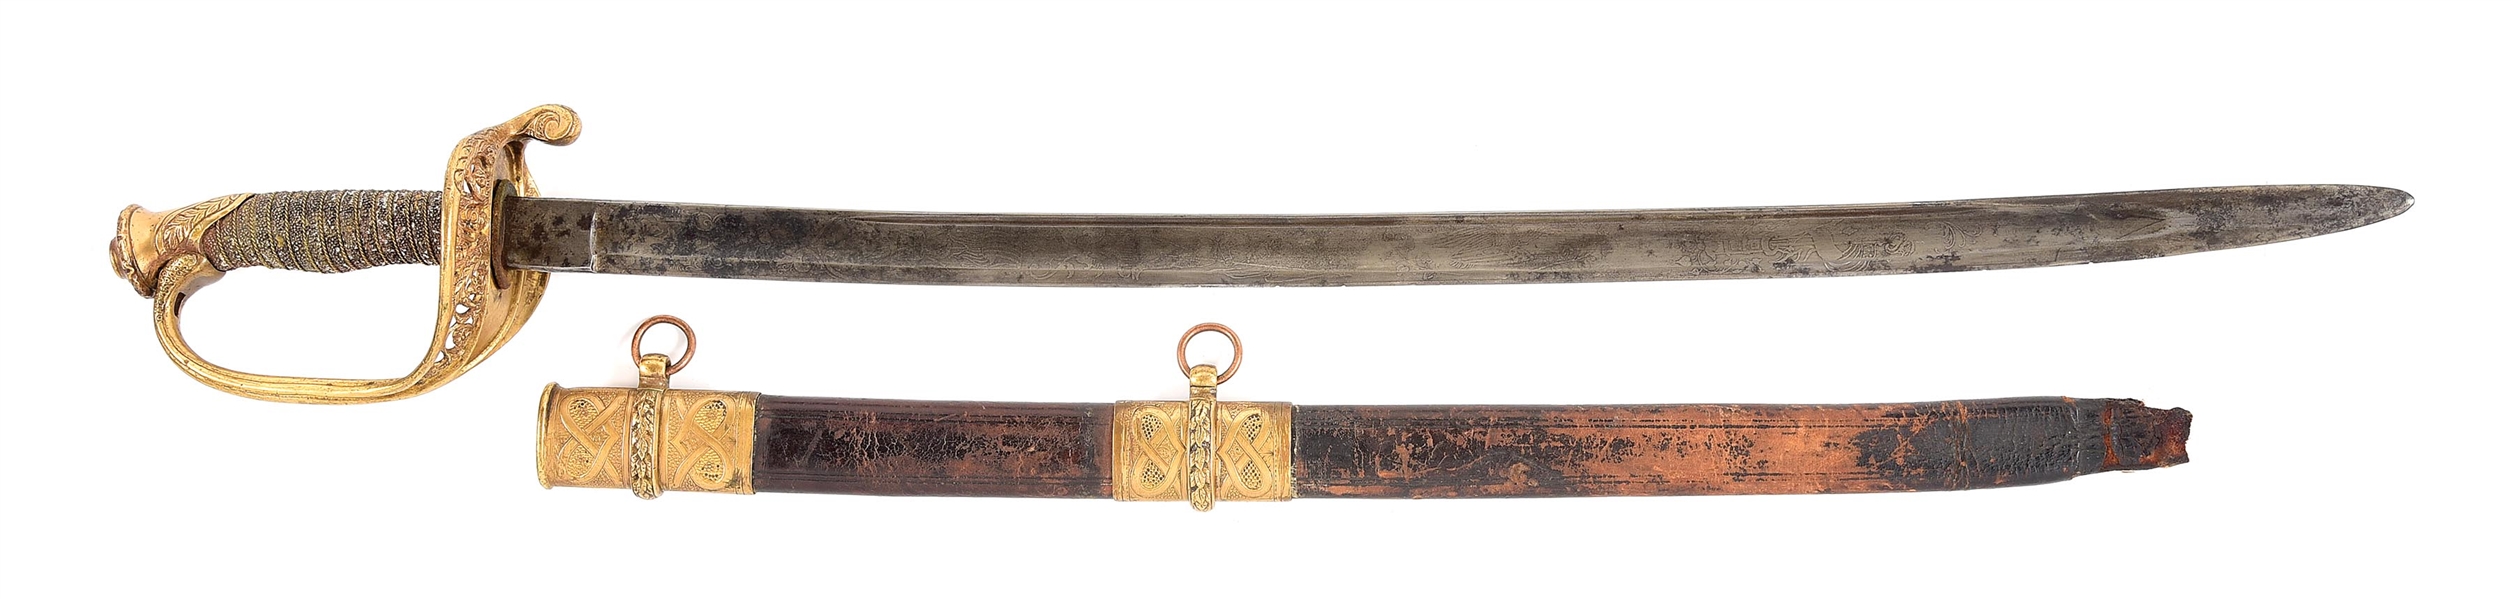 M1850 STAFF AND FIELD PRESENTATION SWORD OF MAJOR JOHN J. BRADSHAW, WIA WILDERNESS, BREVET MAJOR FOR GALLANT AND MERITORIOUS SERVICES BEFORE PETERSBURG, VIRGINIA, APRIL 2, 1865.